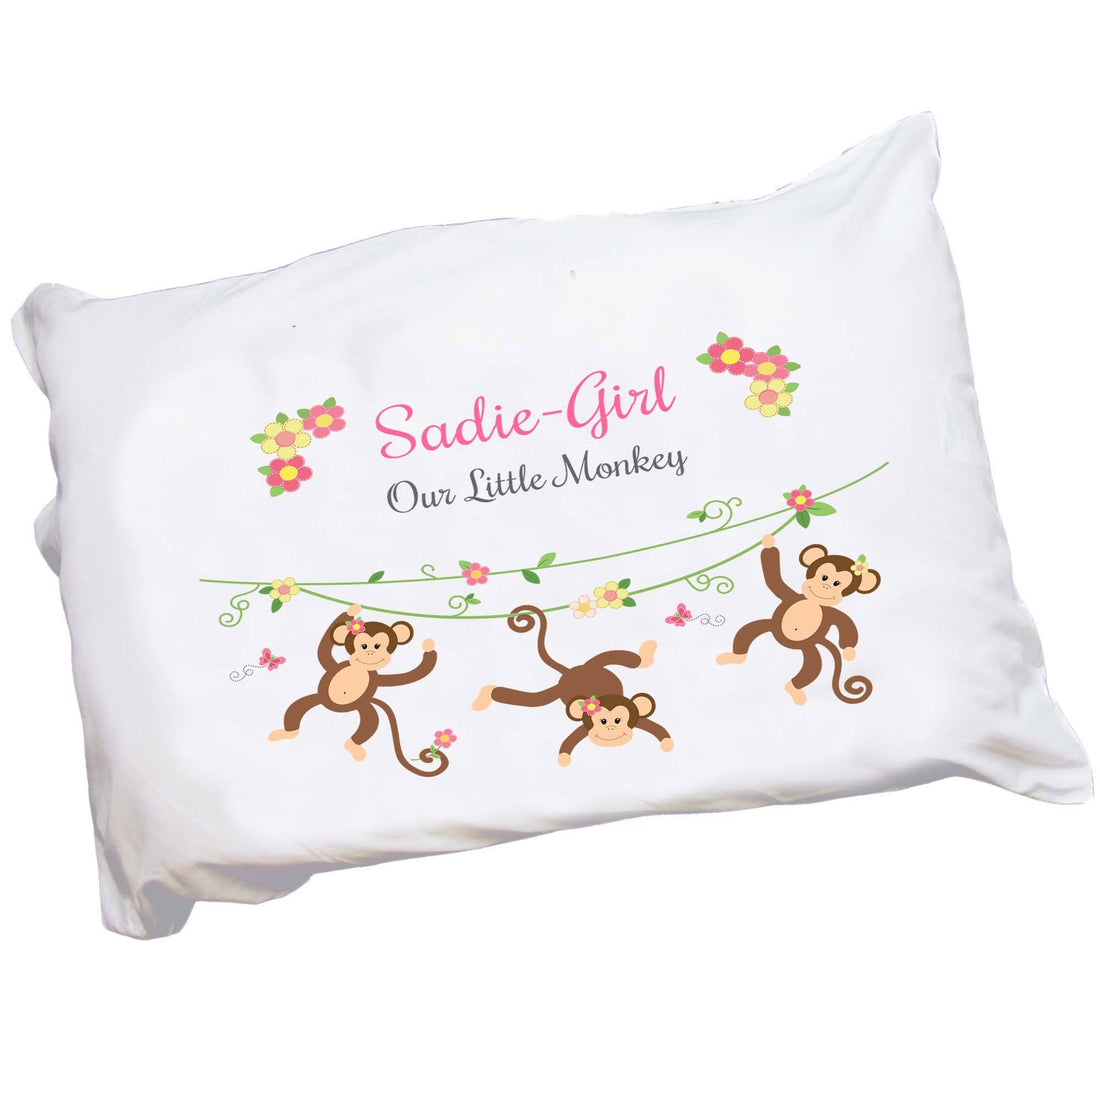 Personalized Childrens Pillowcase with Monkey Girl design